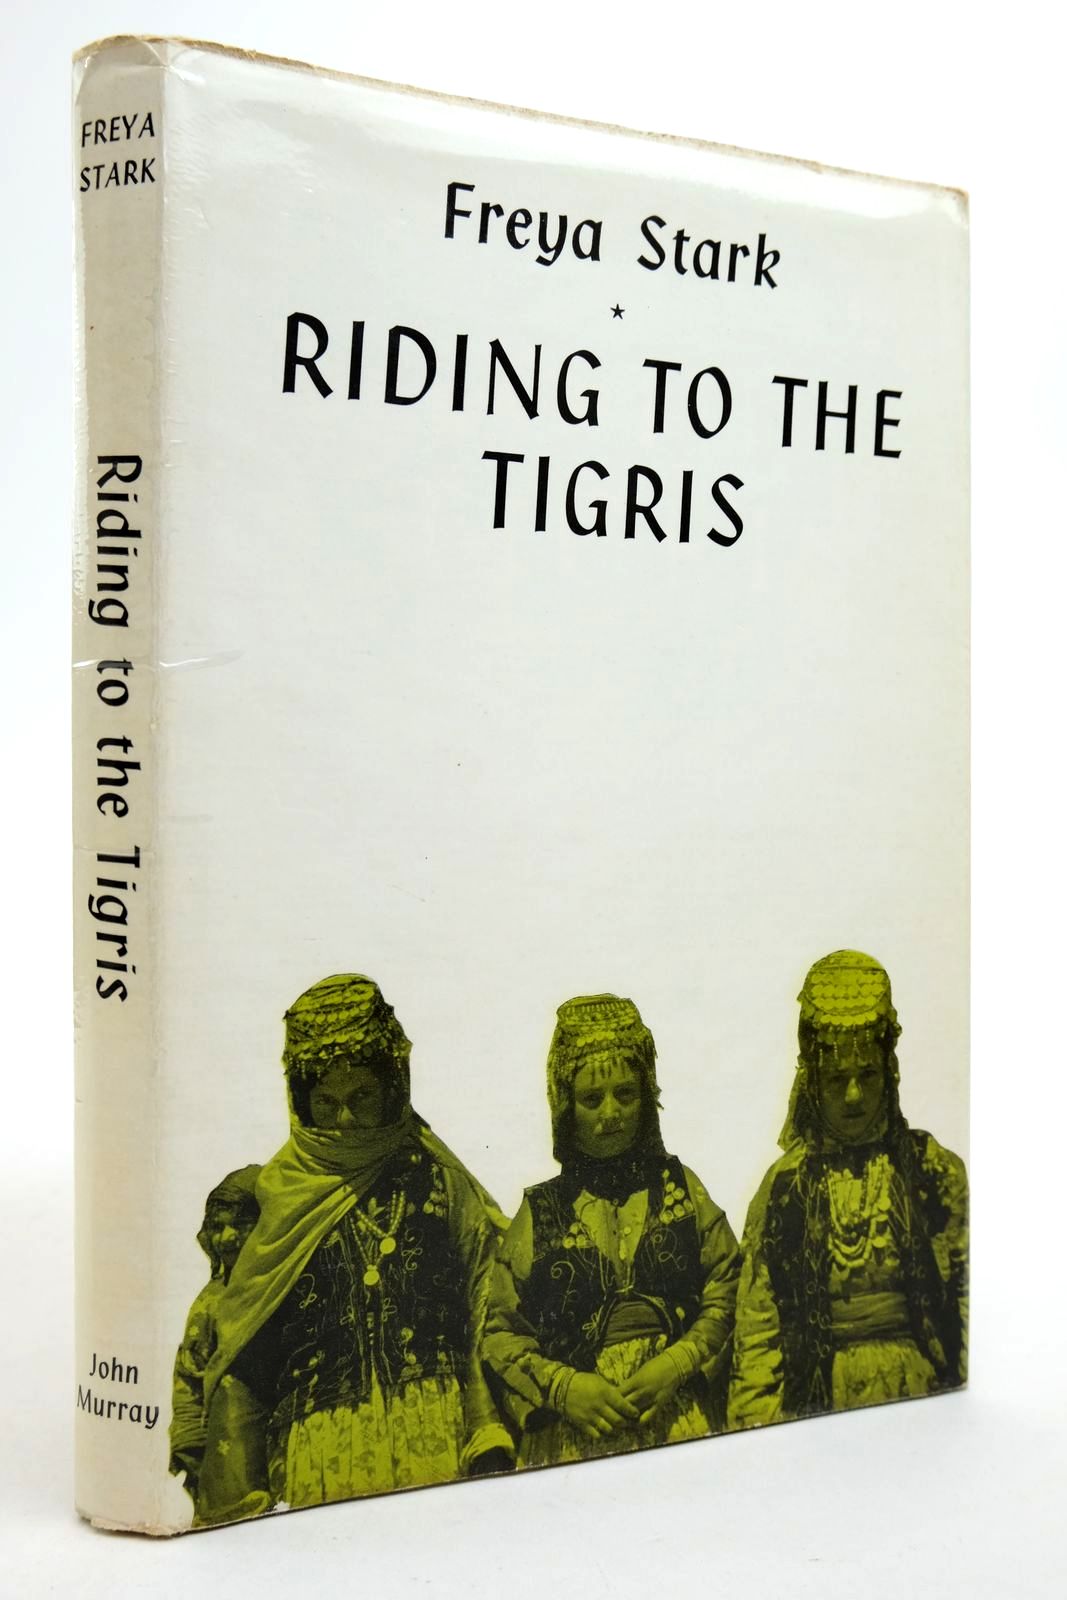 Photo of RIDING TO THE TIGRIS written by Stark, Freya published by John Murray (STOCK CODE: 2140645)  for sale by Stella & Rose's Books